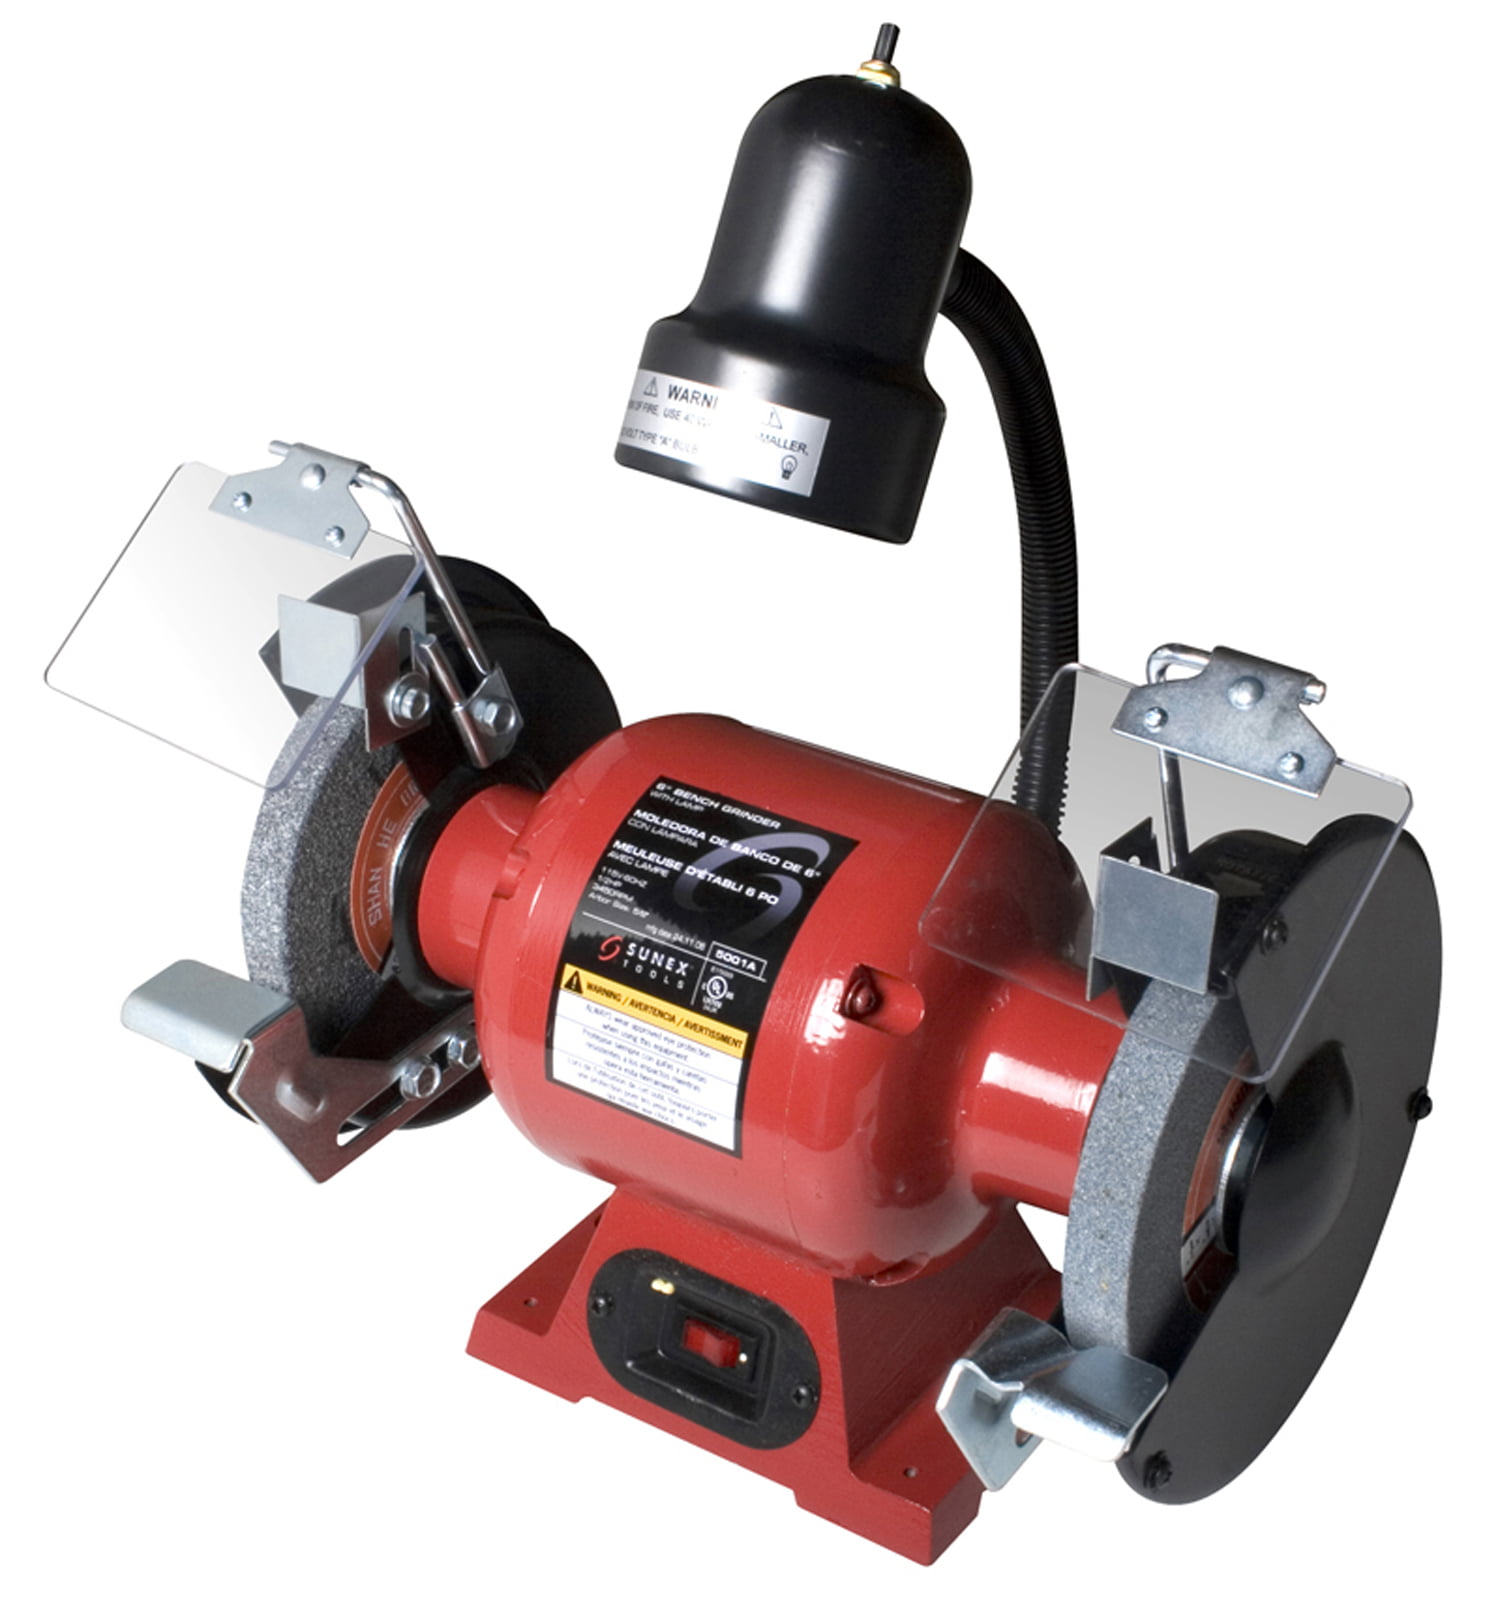 Sunex 5002A Bench Grinder with Light 8-Inch